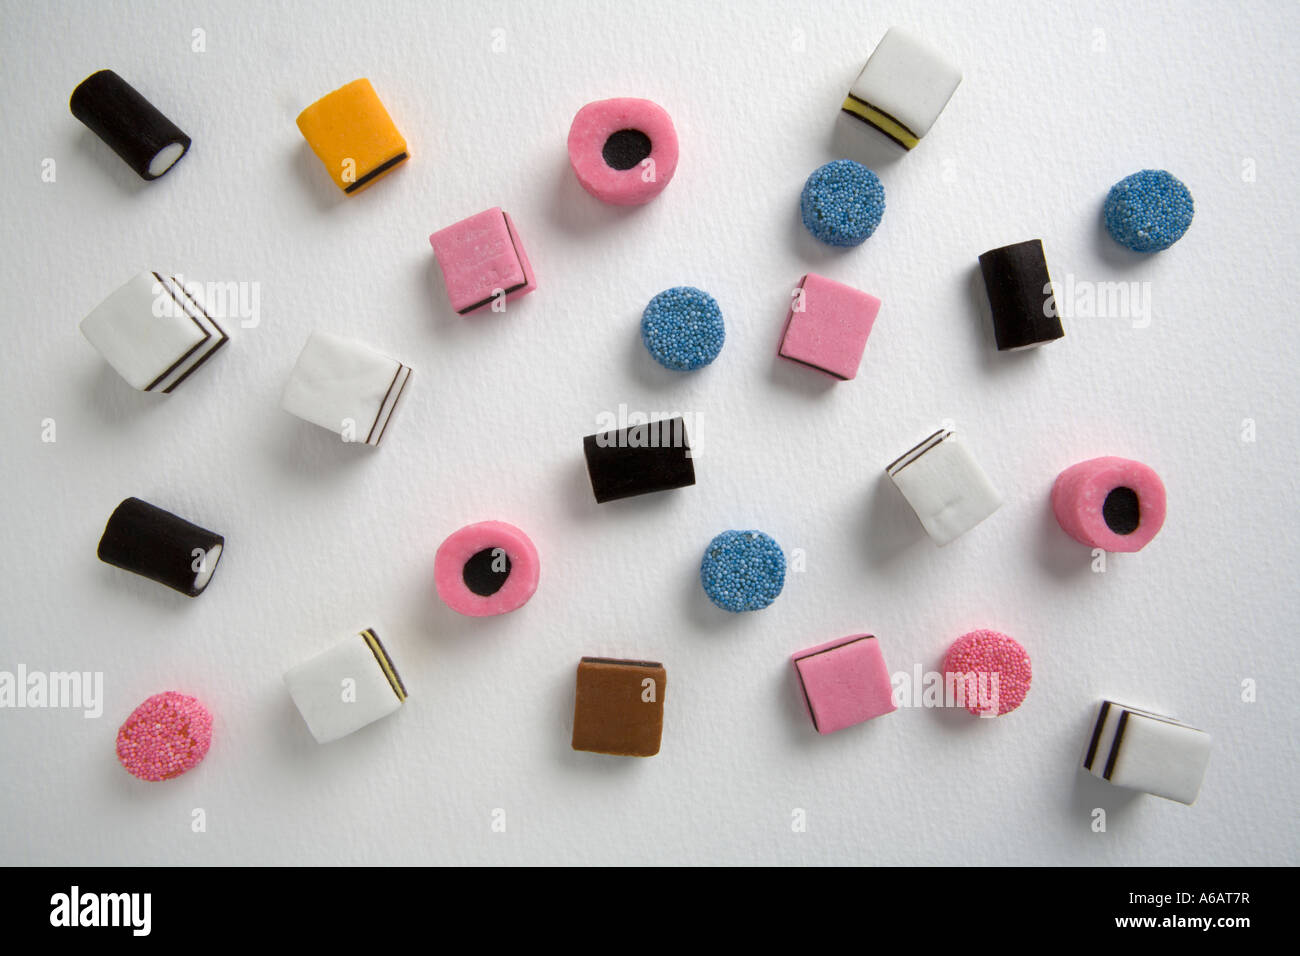 all different Liquorice Allsorts birds eye view on a white back ground ...